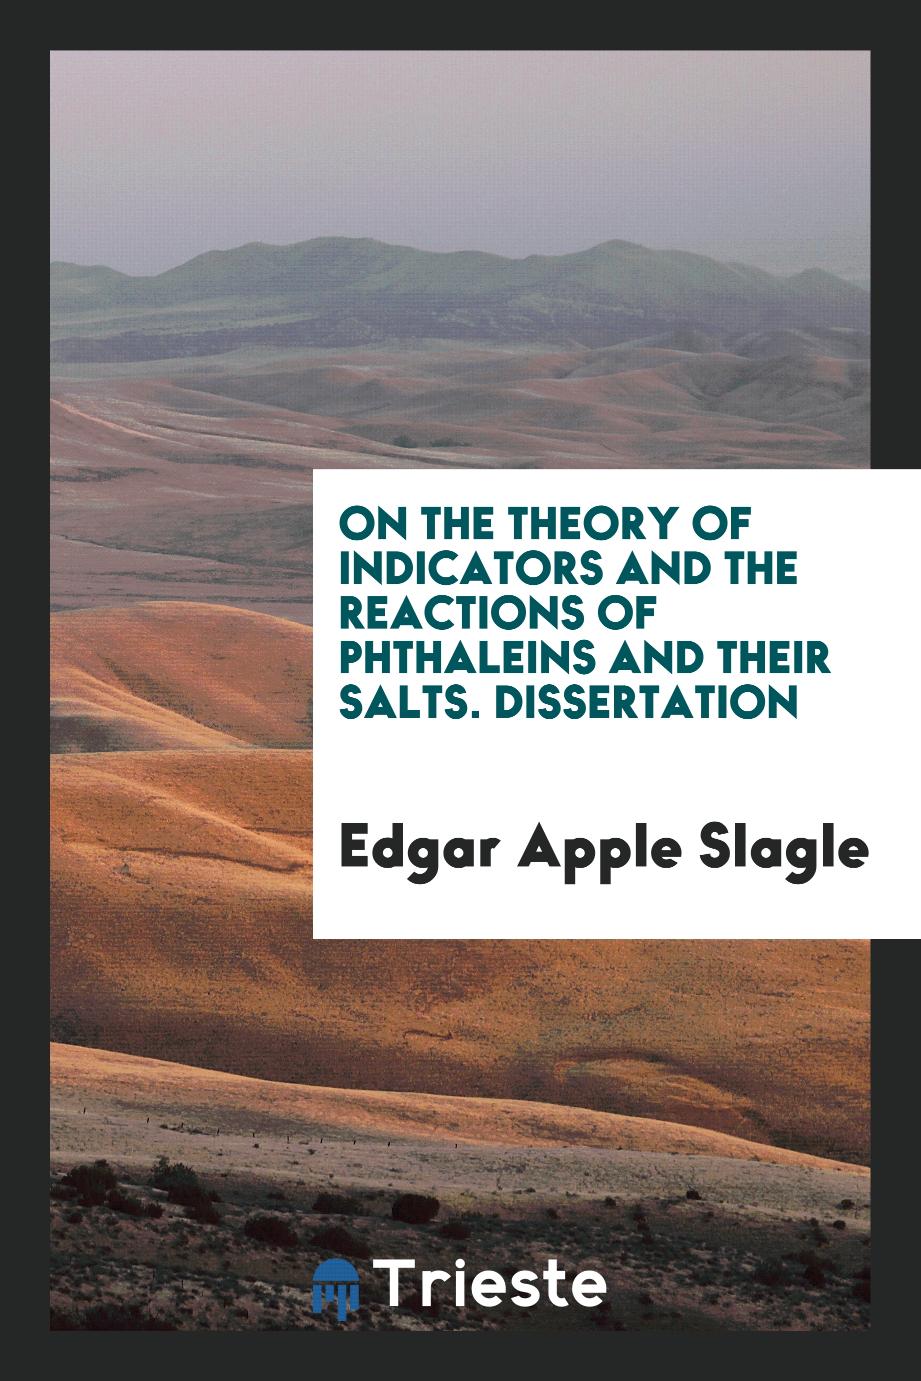 On the theory of indicators and the reactions of phthaleins and their salts. Dissertation